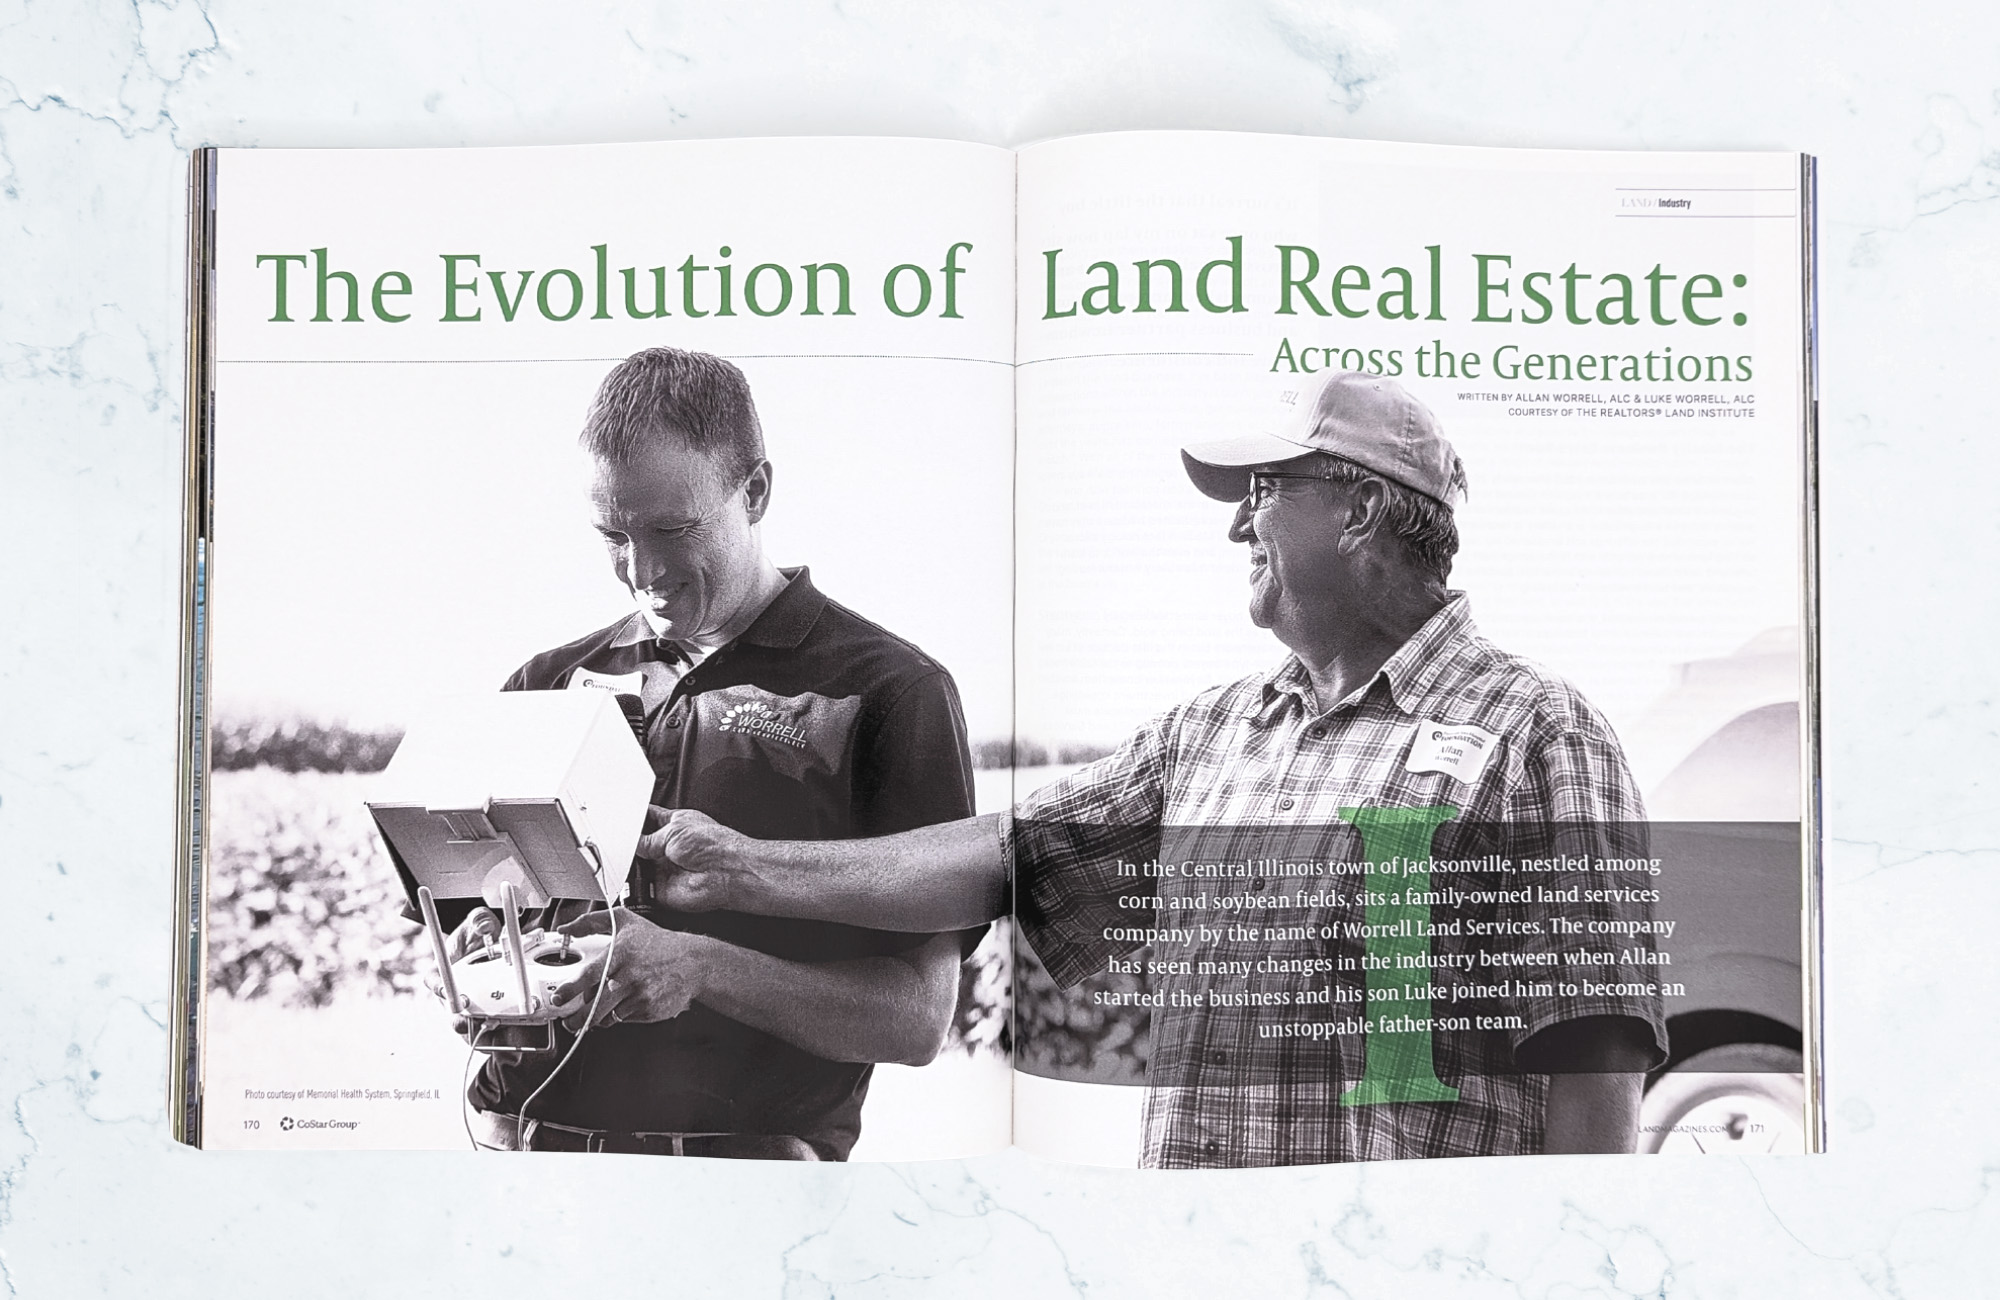 A magazine on a light marbled surface is open to a cover spread for an article titled The Evolution of Land Real Estate: Across the Generations. There is a black-and-white image of an older man in a baseball cap smiling as his adult son is holding a survey device.